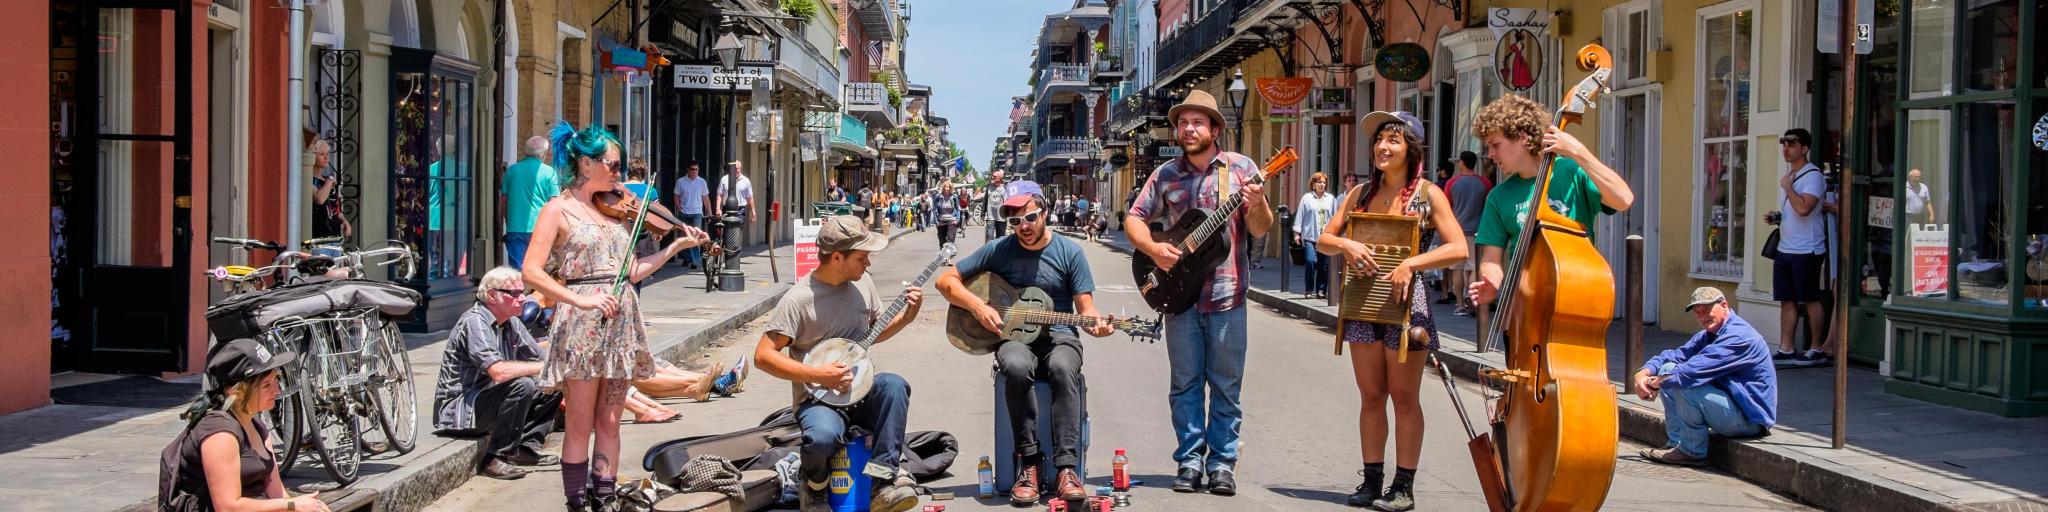 Street performers playing blue grass style music in the French Quarter district in New Orleans on a sunny day